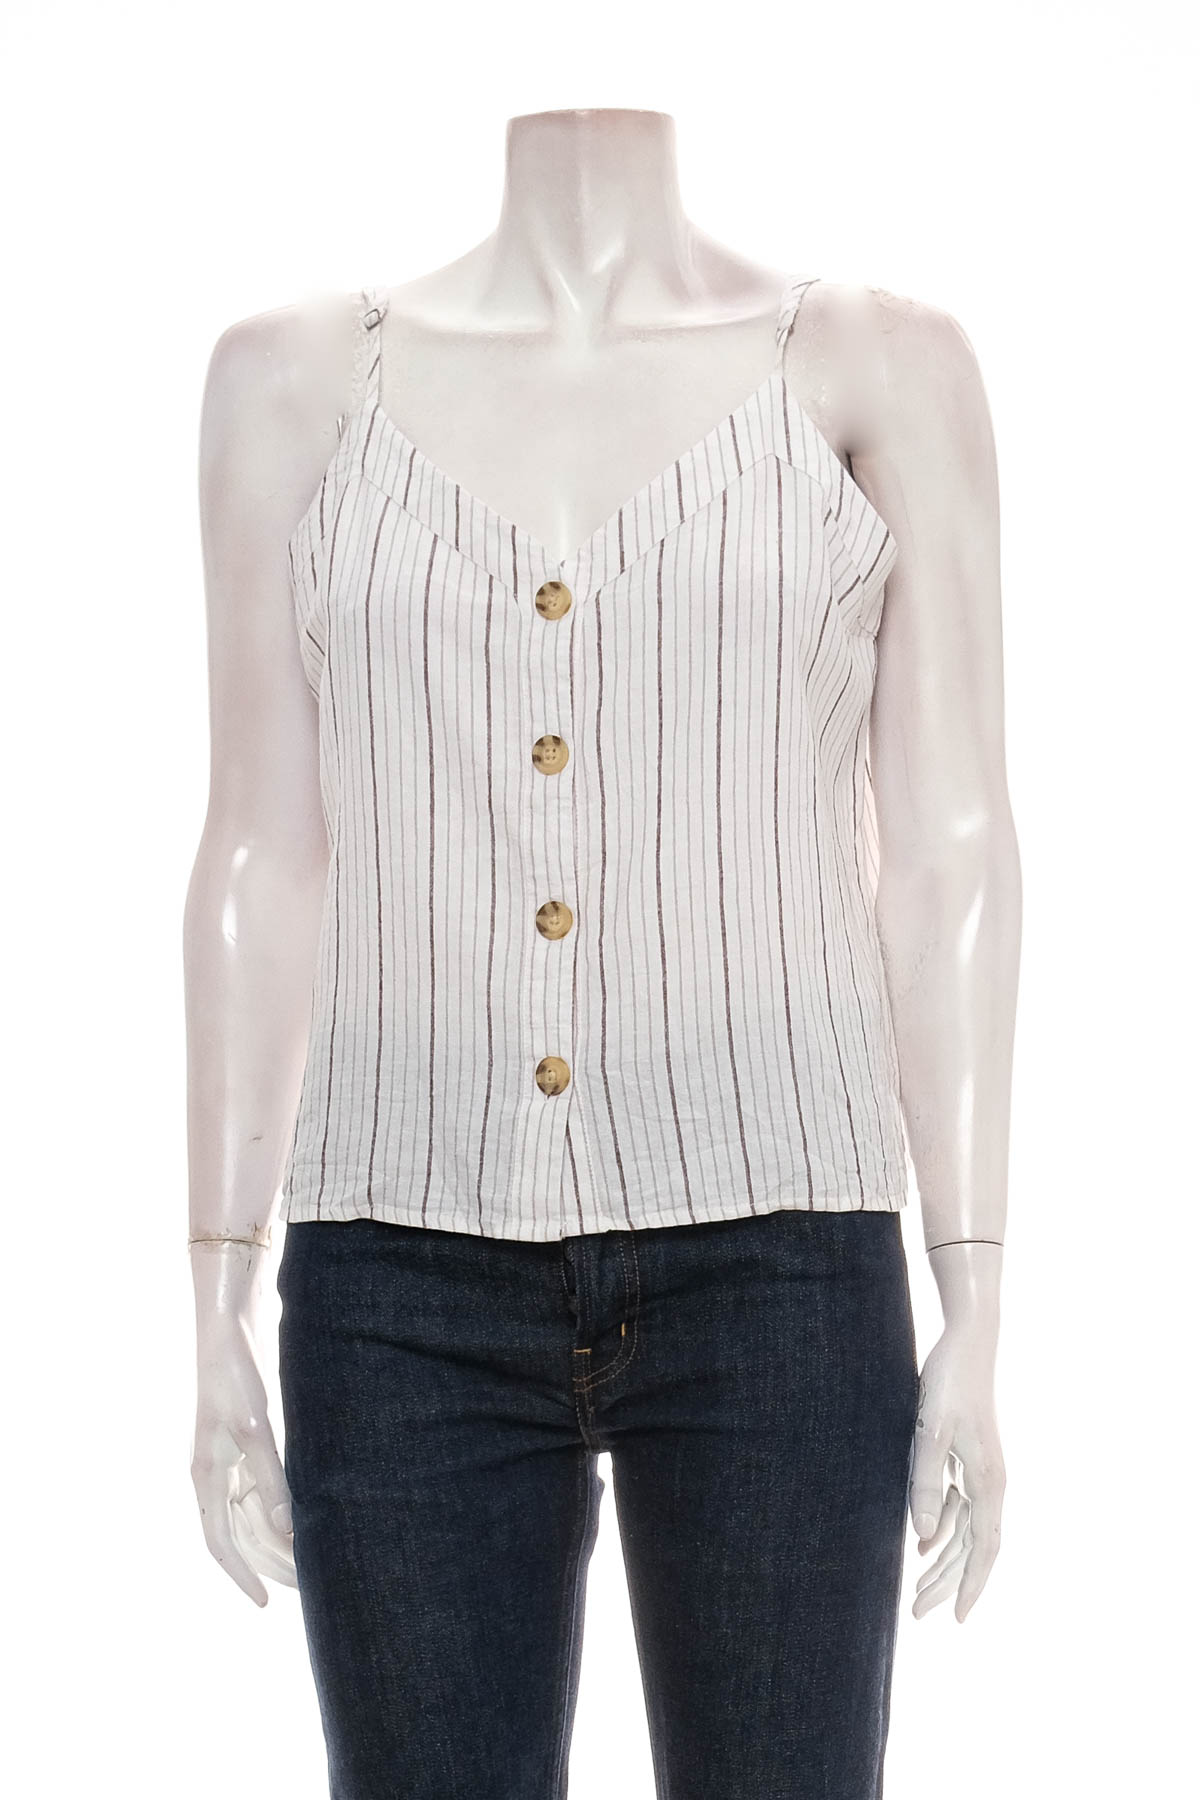 Women's shirt - Abercrombie & Fitch - 0